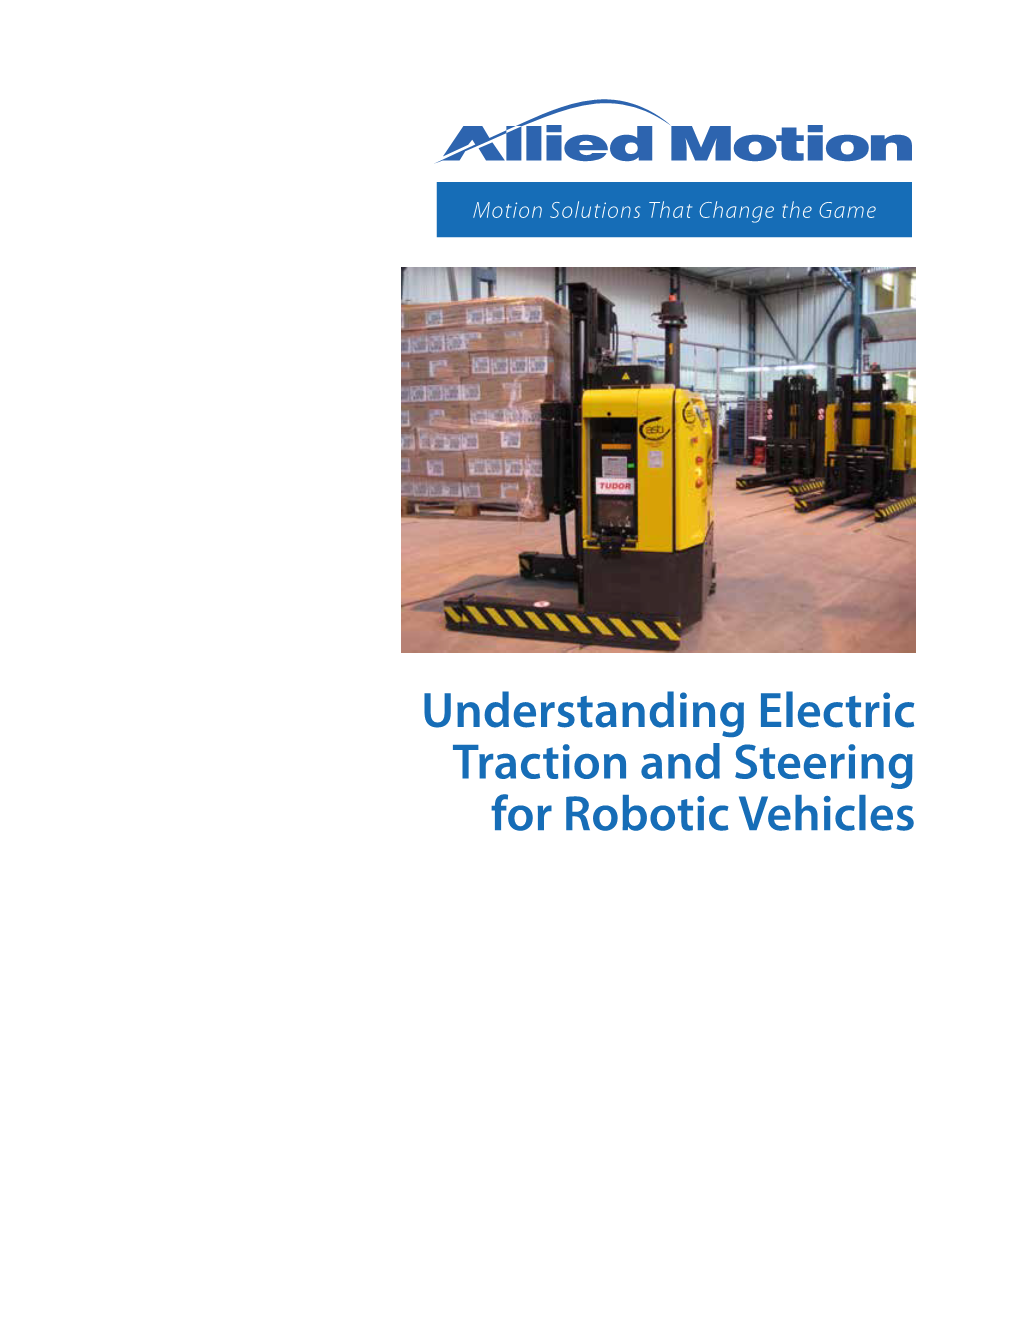 Understanding Electric Traction and Steering for Robotic Vehicles